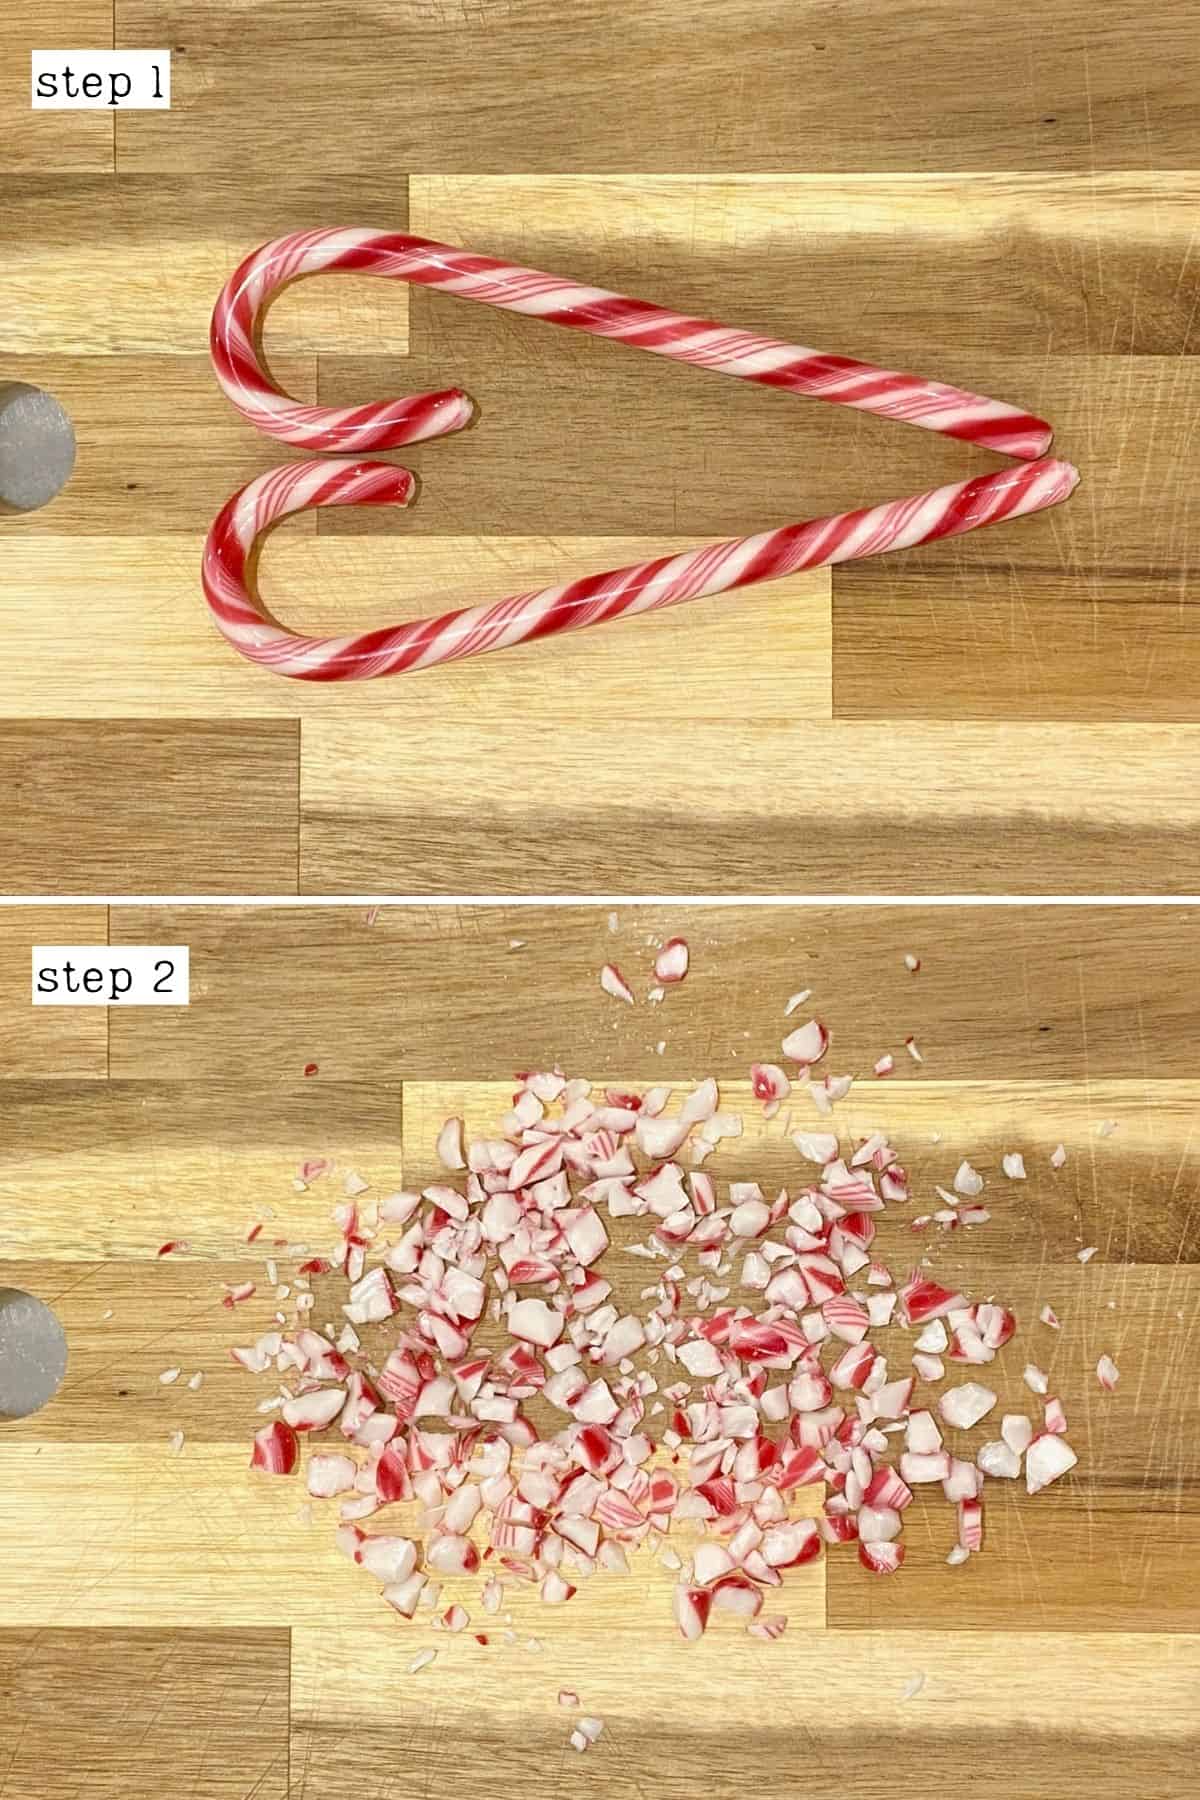 Steps for crushing peppermint candy